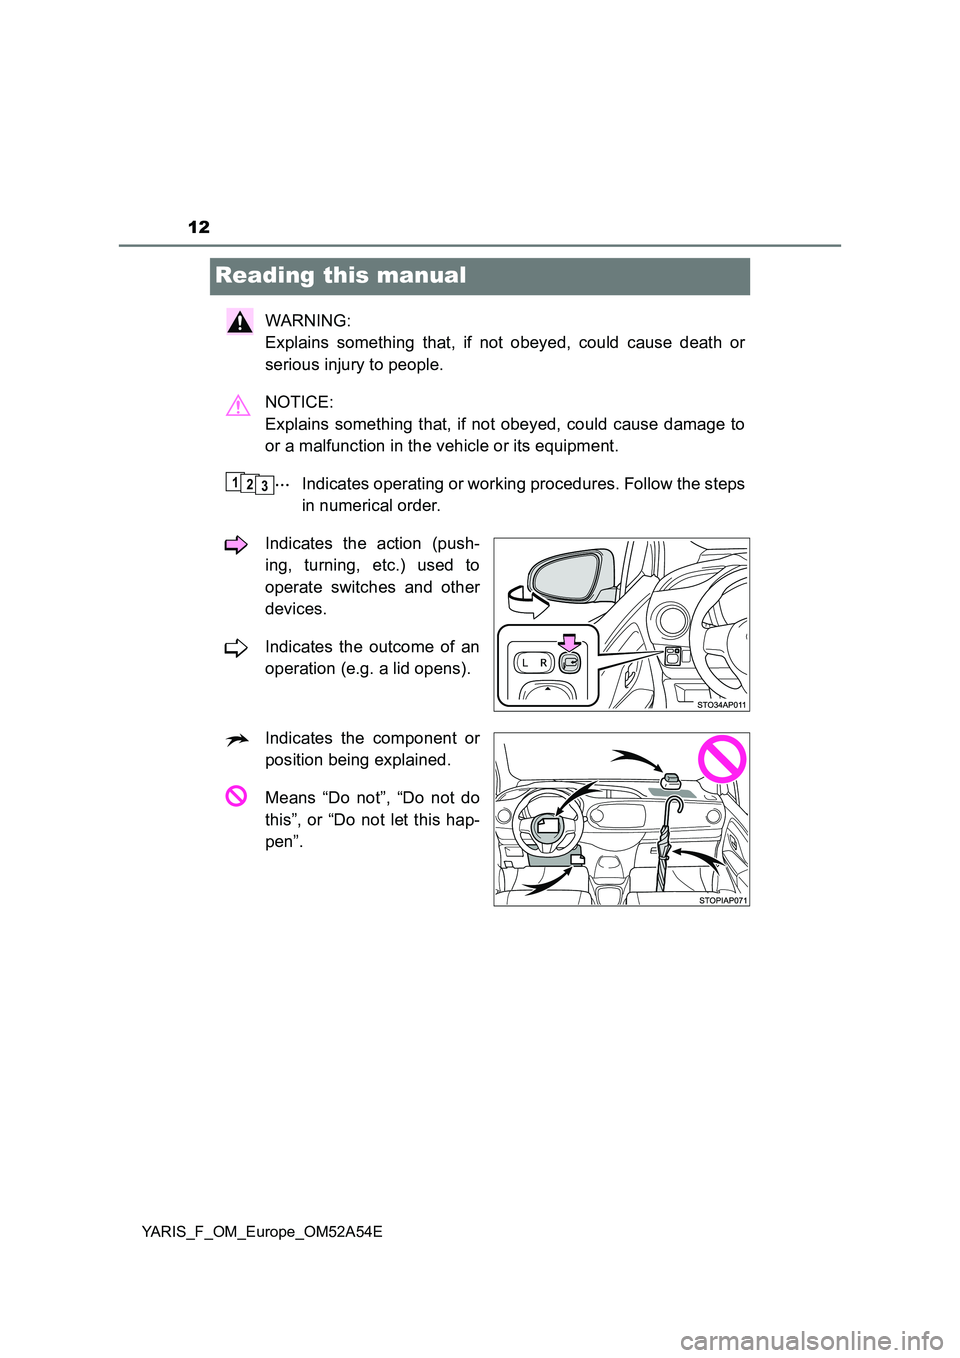 TOYOTA YARIS 2020  Owners Manual 12
YARIS_F_OM_Europe_OM52A54E
Reading this manual
WARNING: 
Explains something that, if not obeyed, could cause death or
serious injury to people.
NOTICE: 
Explains something that, if not obeyed, coul